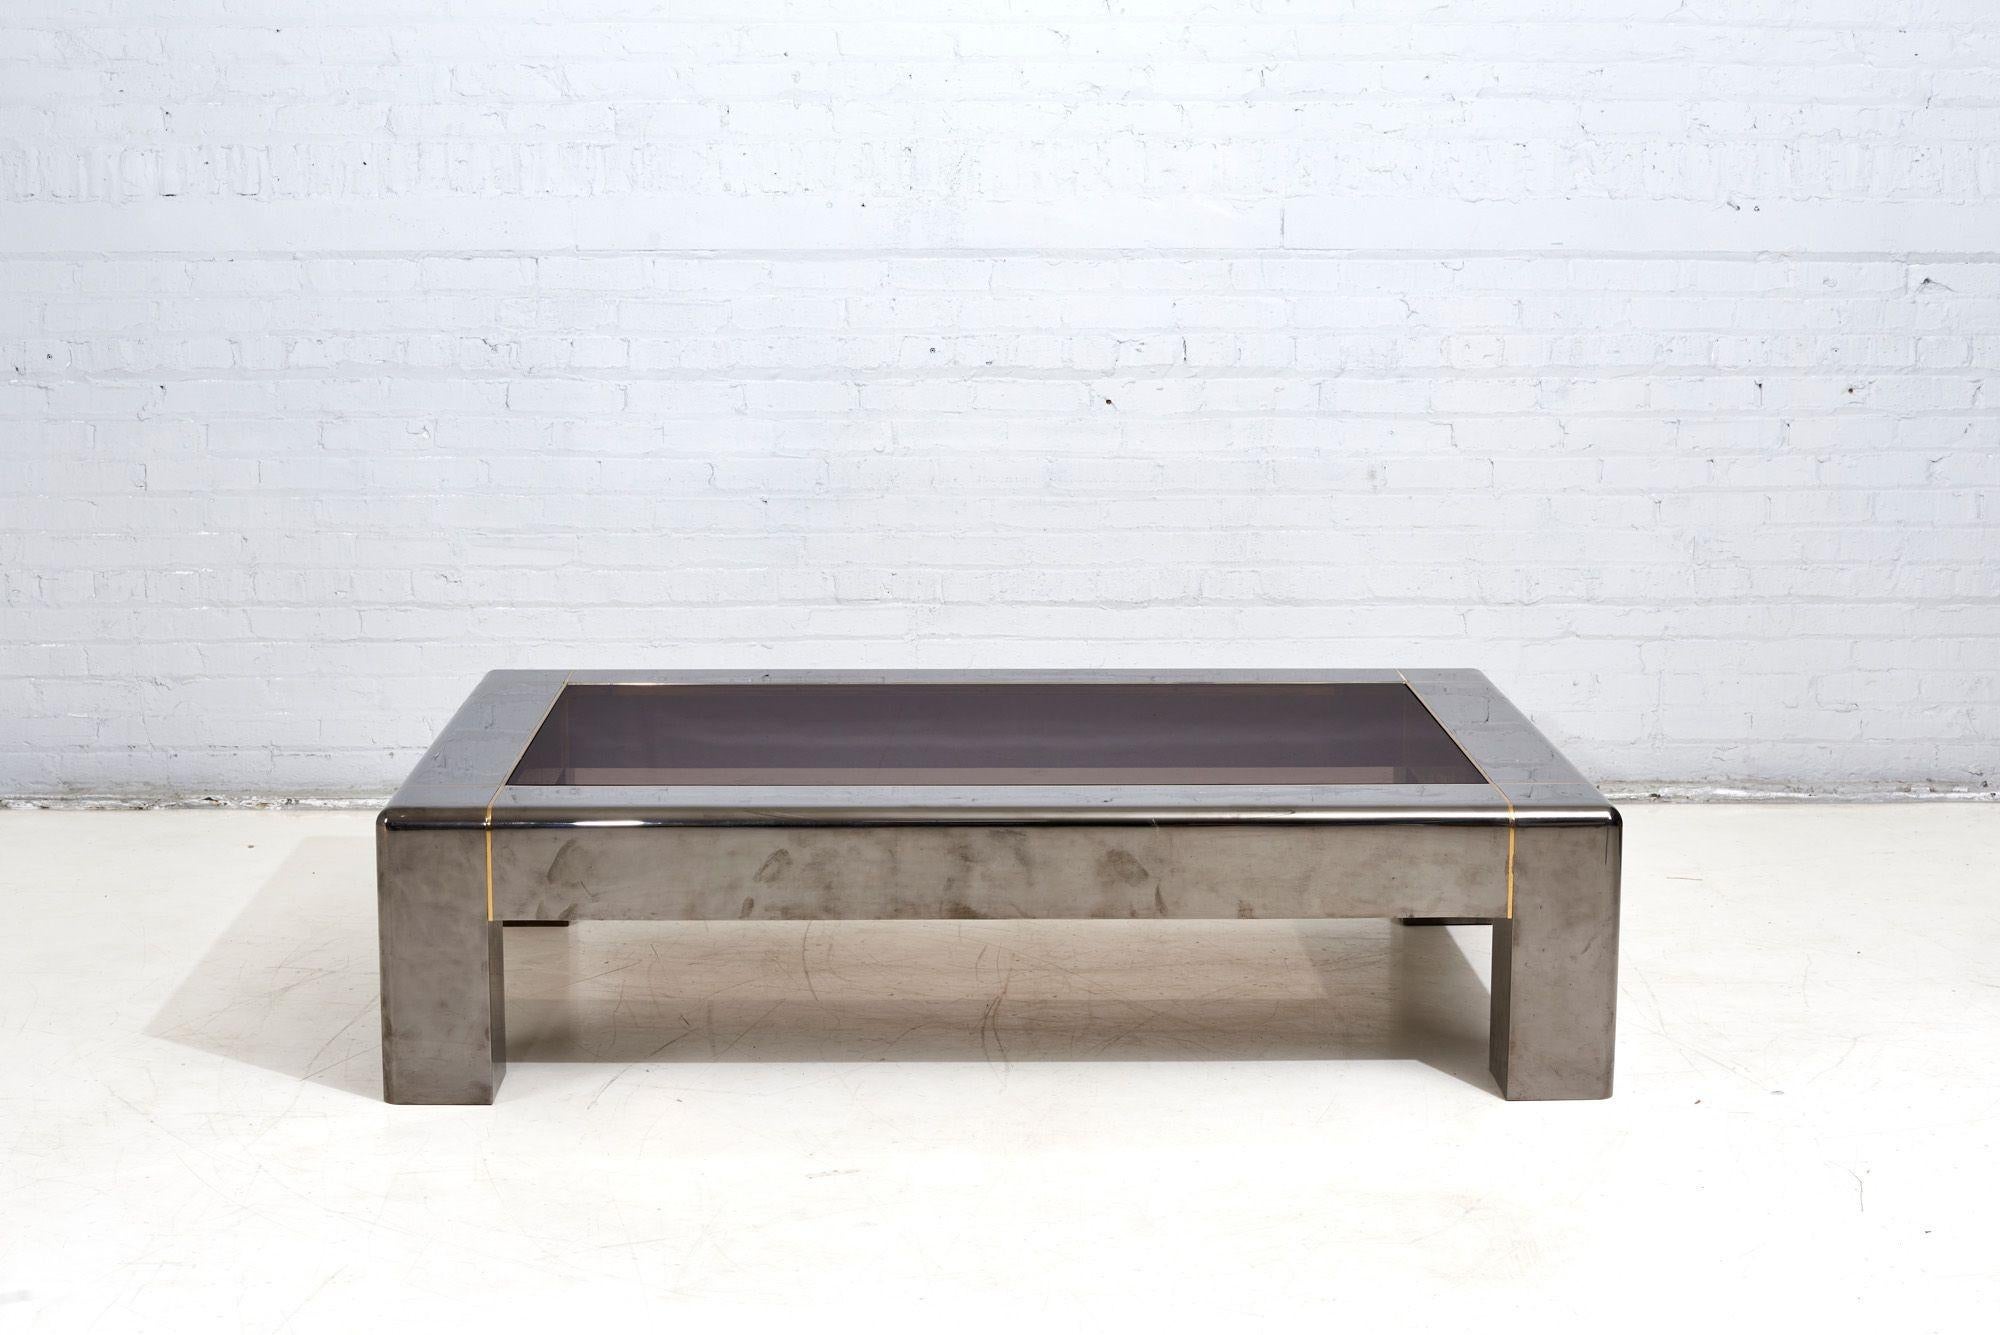 Karl Springer rare Gunmetal and glass Coffee table with bronze inlaid trim 1980. Table is documented in the Karl Springer Ltd. Catalog